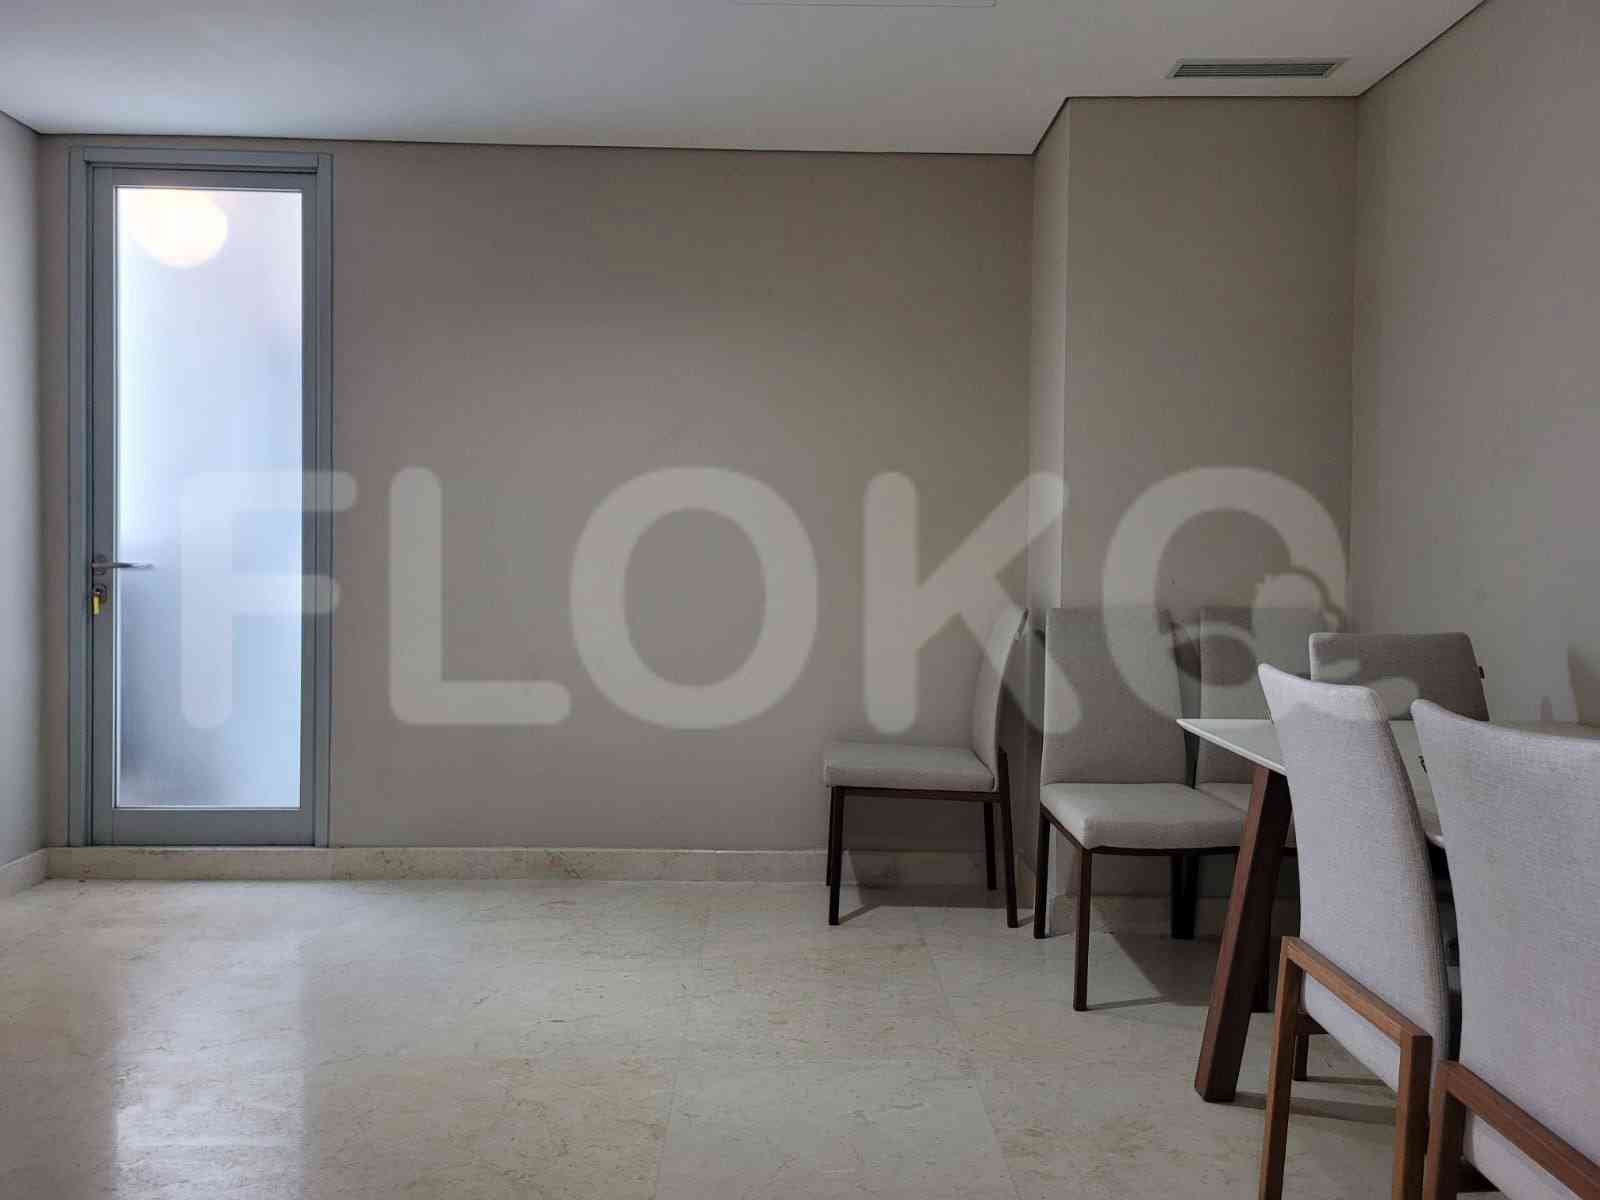 1 Bedroom on 16th Floor for Rent in Ciputra World 2 Apartment - fkue89 8